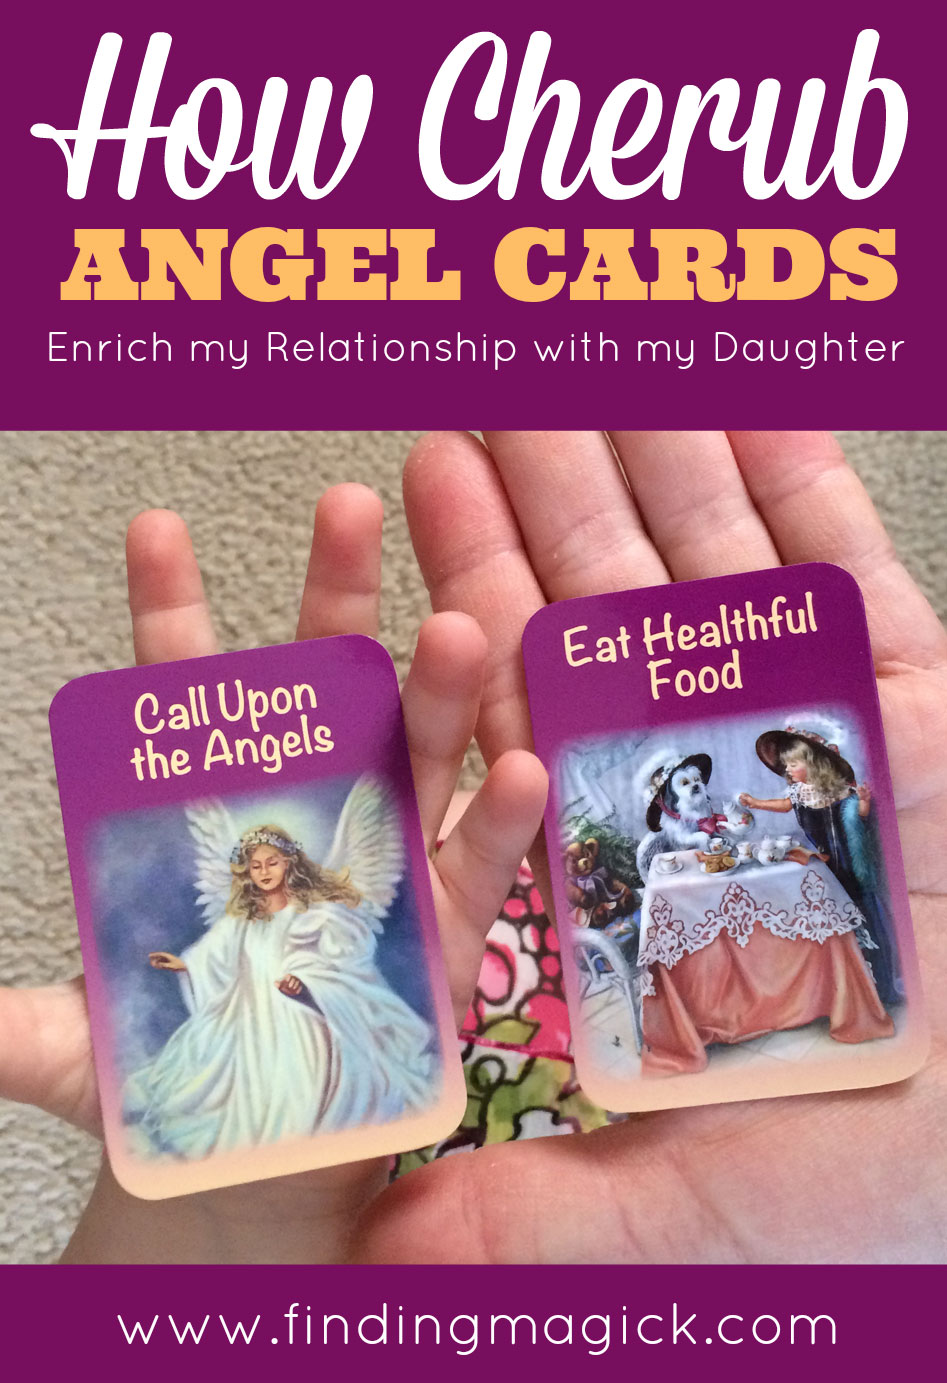 How Cherub Angel Cards For Children Enrich my Relationship with my Daughter - FindingMagick.com